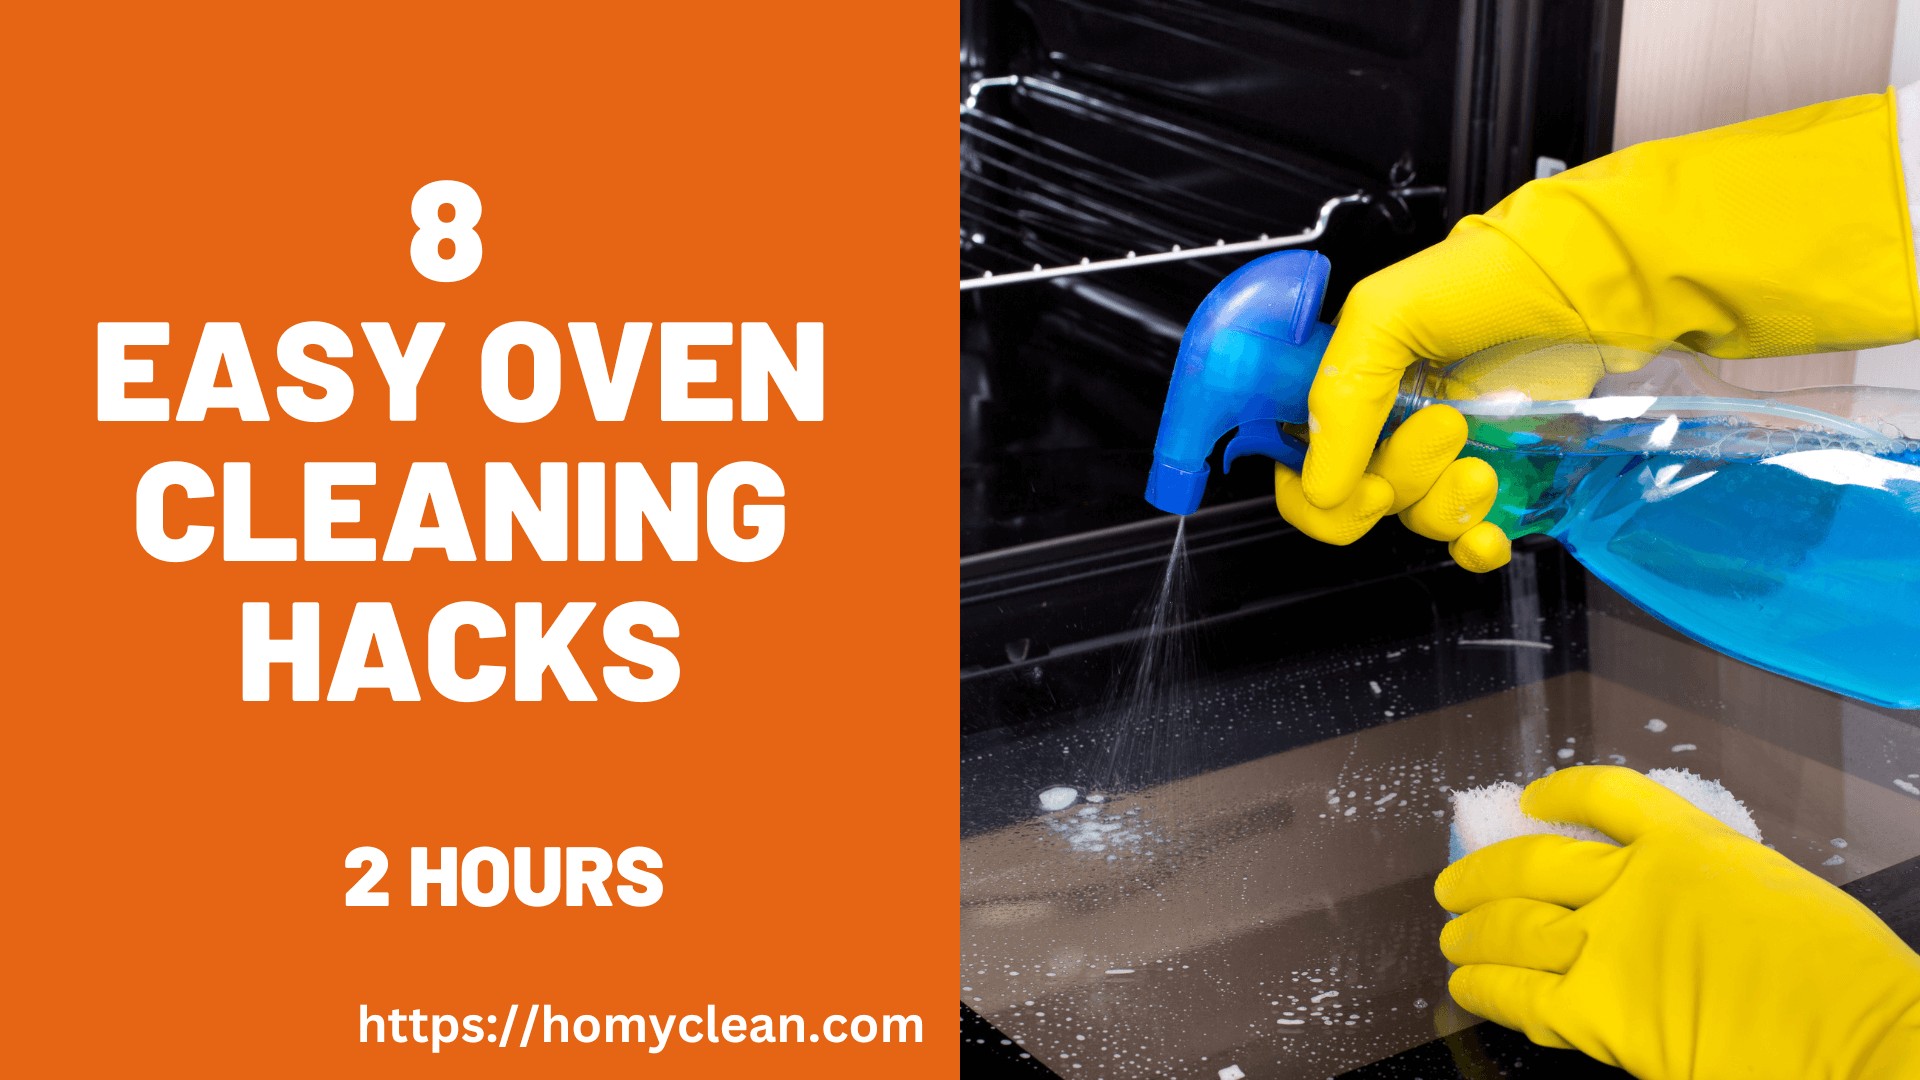 8 Oven Cleaning Hacks | Easy and Effective Ways to Keep Your Oven Sparkling Clean